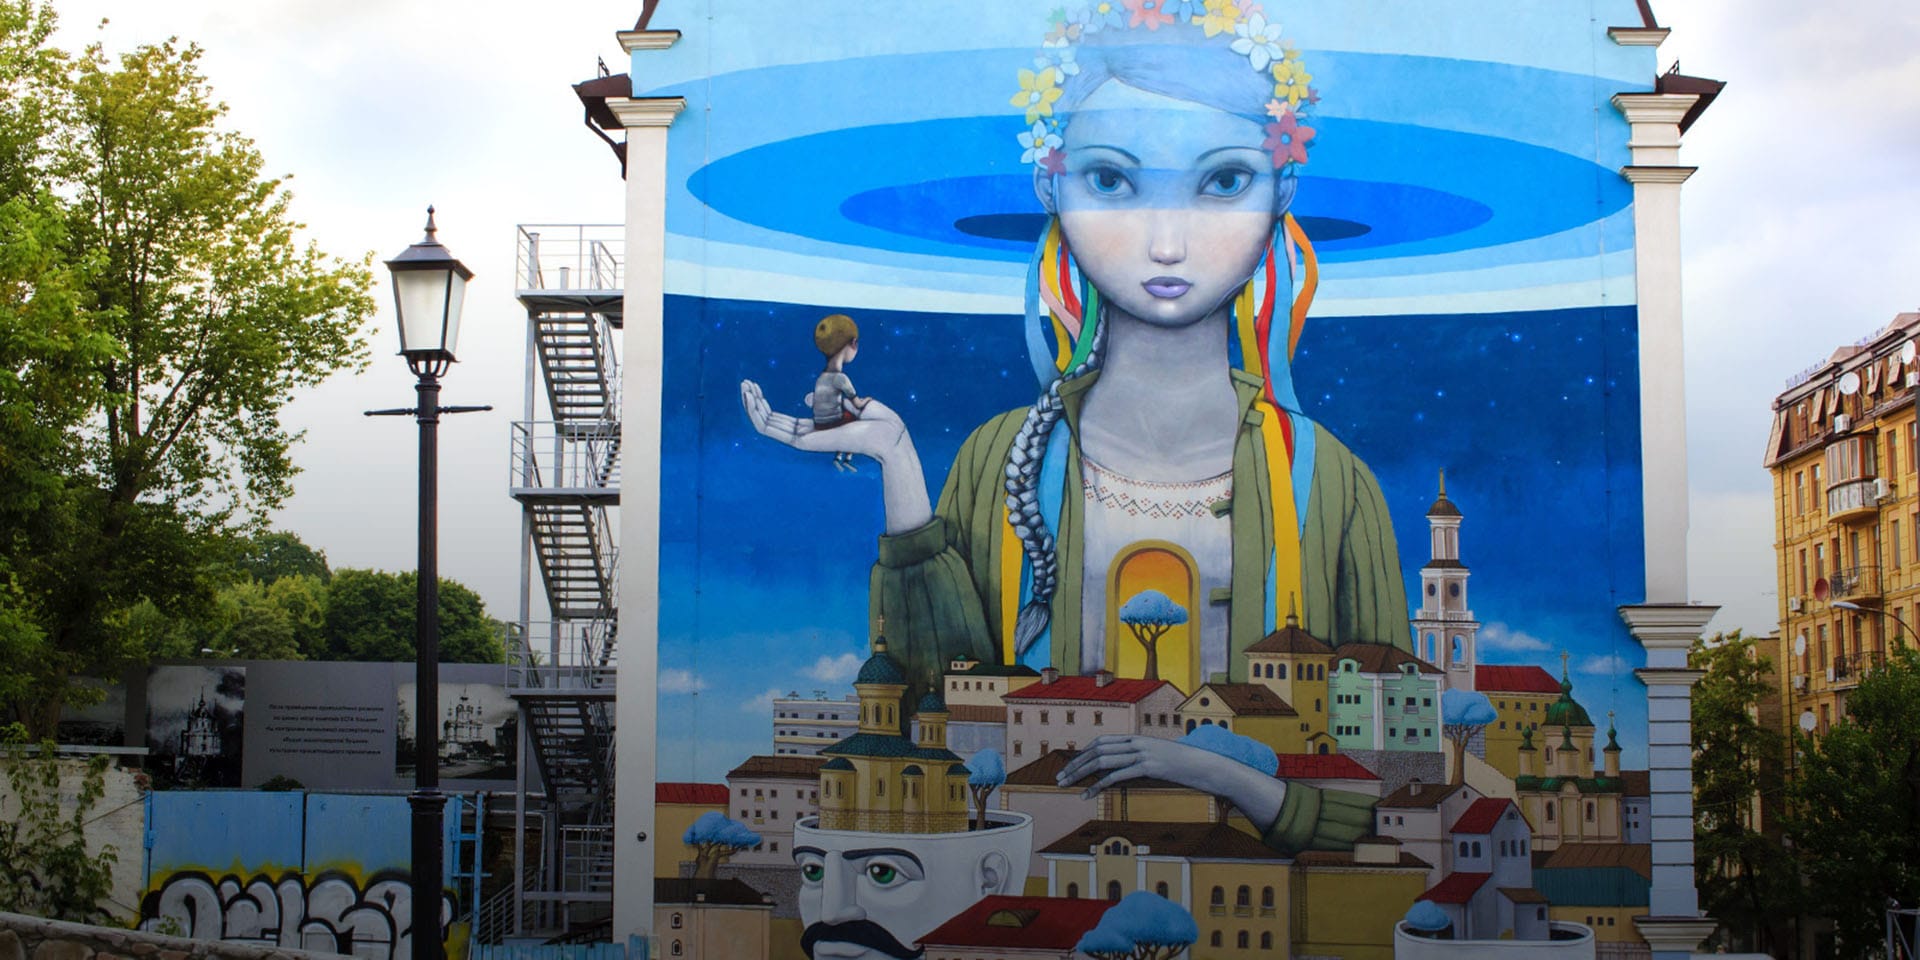 A mural of a large peaceful woman towering above a city with a young boy in her hand.